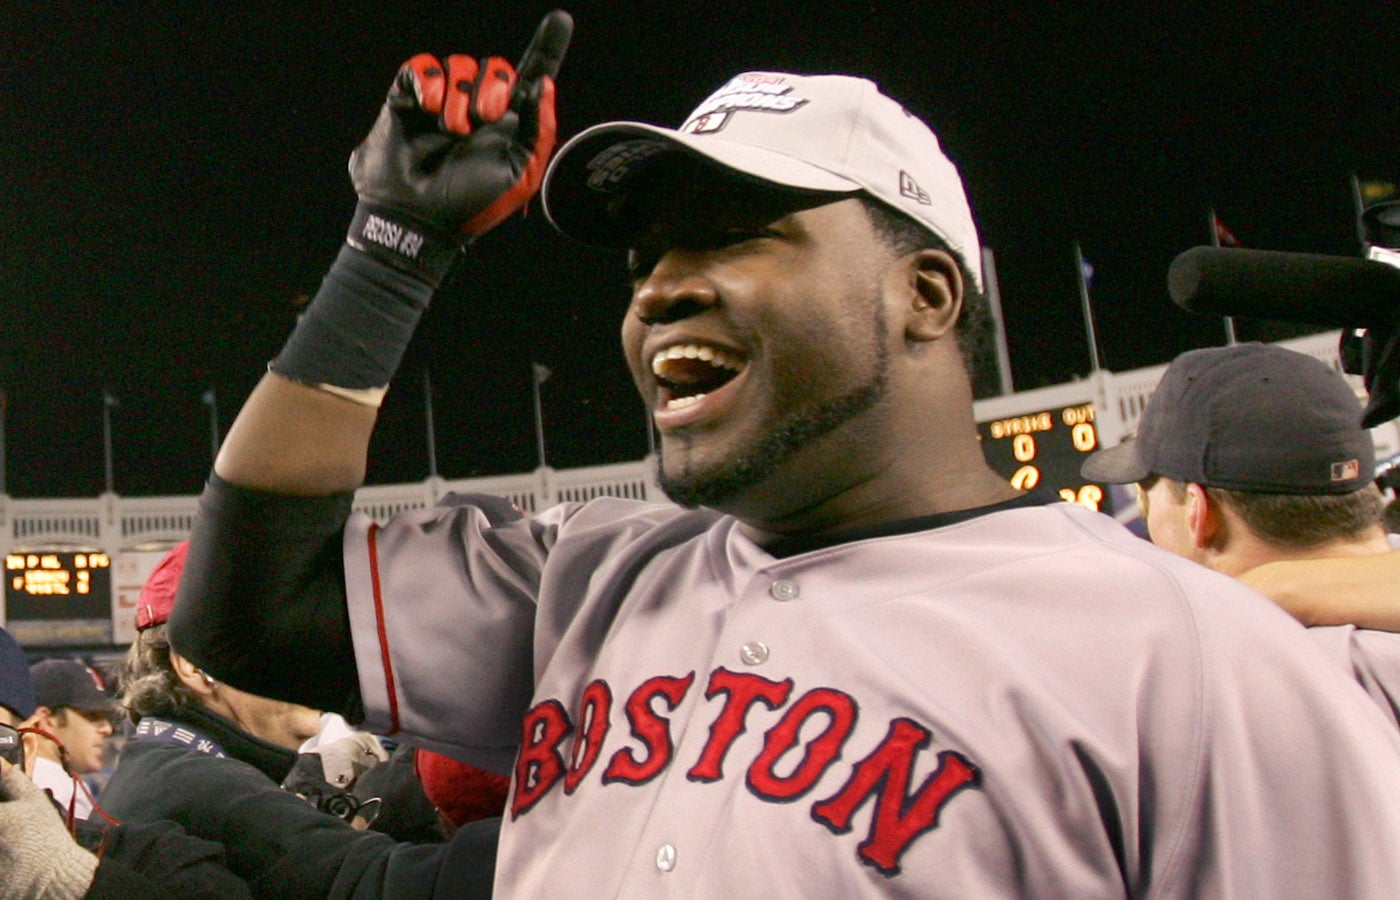 THIS DAY IN BÉISBOL April 24: David Ortiz jersey buried in Yankee Stadium  is latest bizarre chapter in Bosox-Bomber rivalry - Latino Baseball